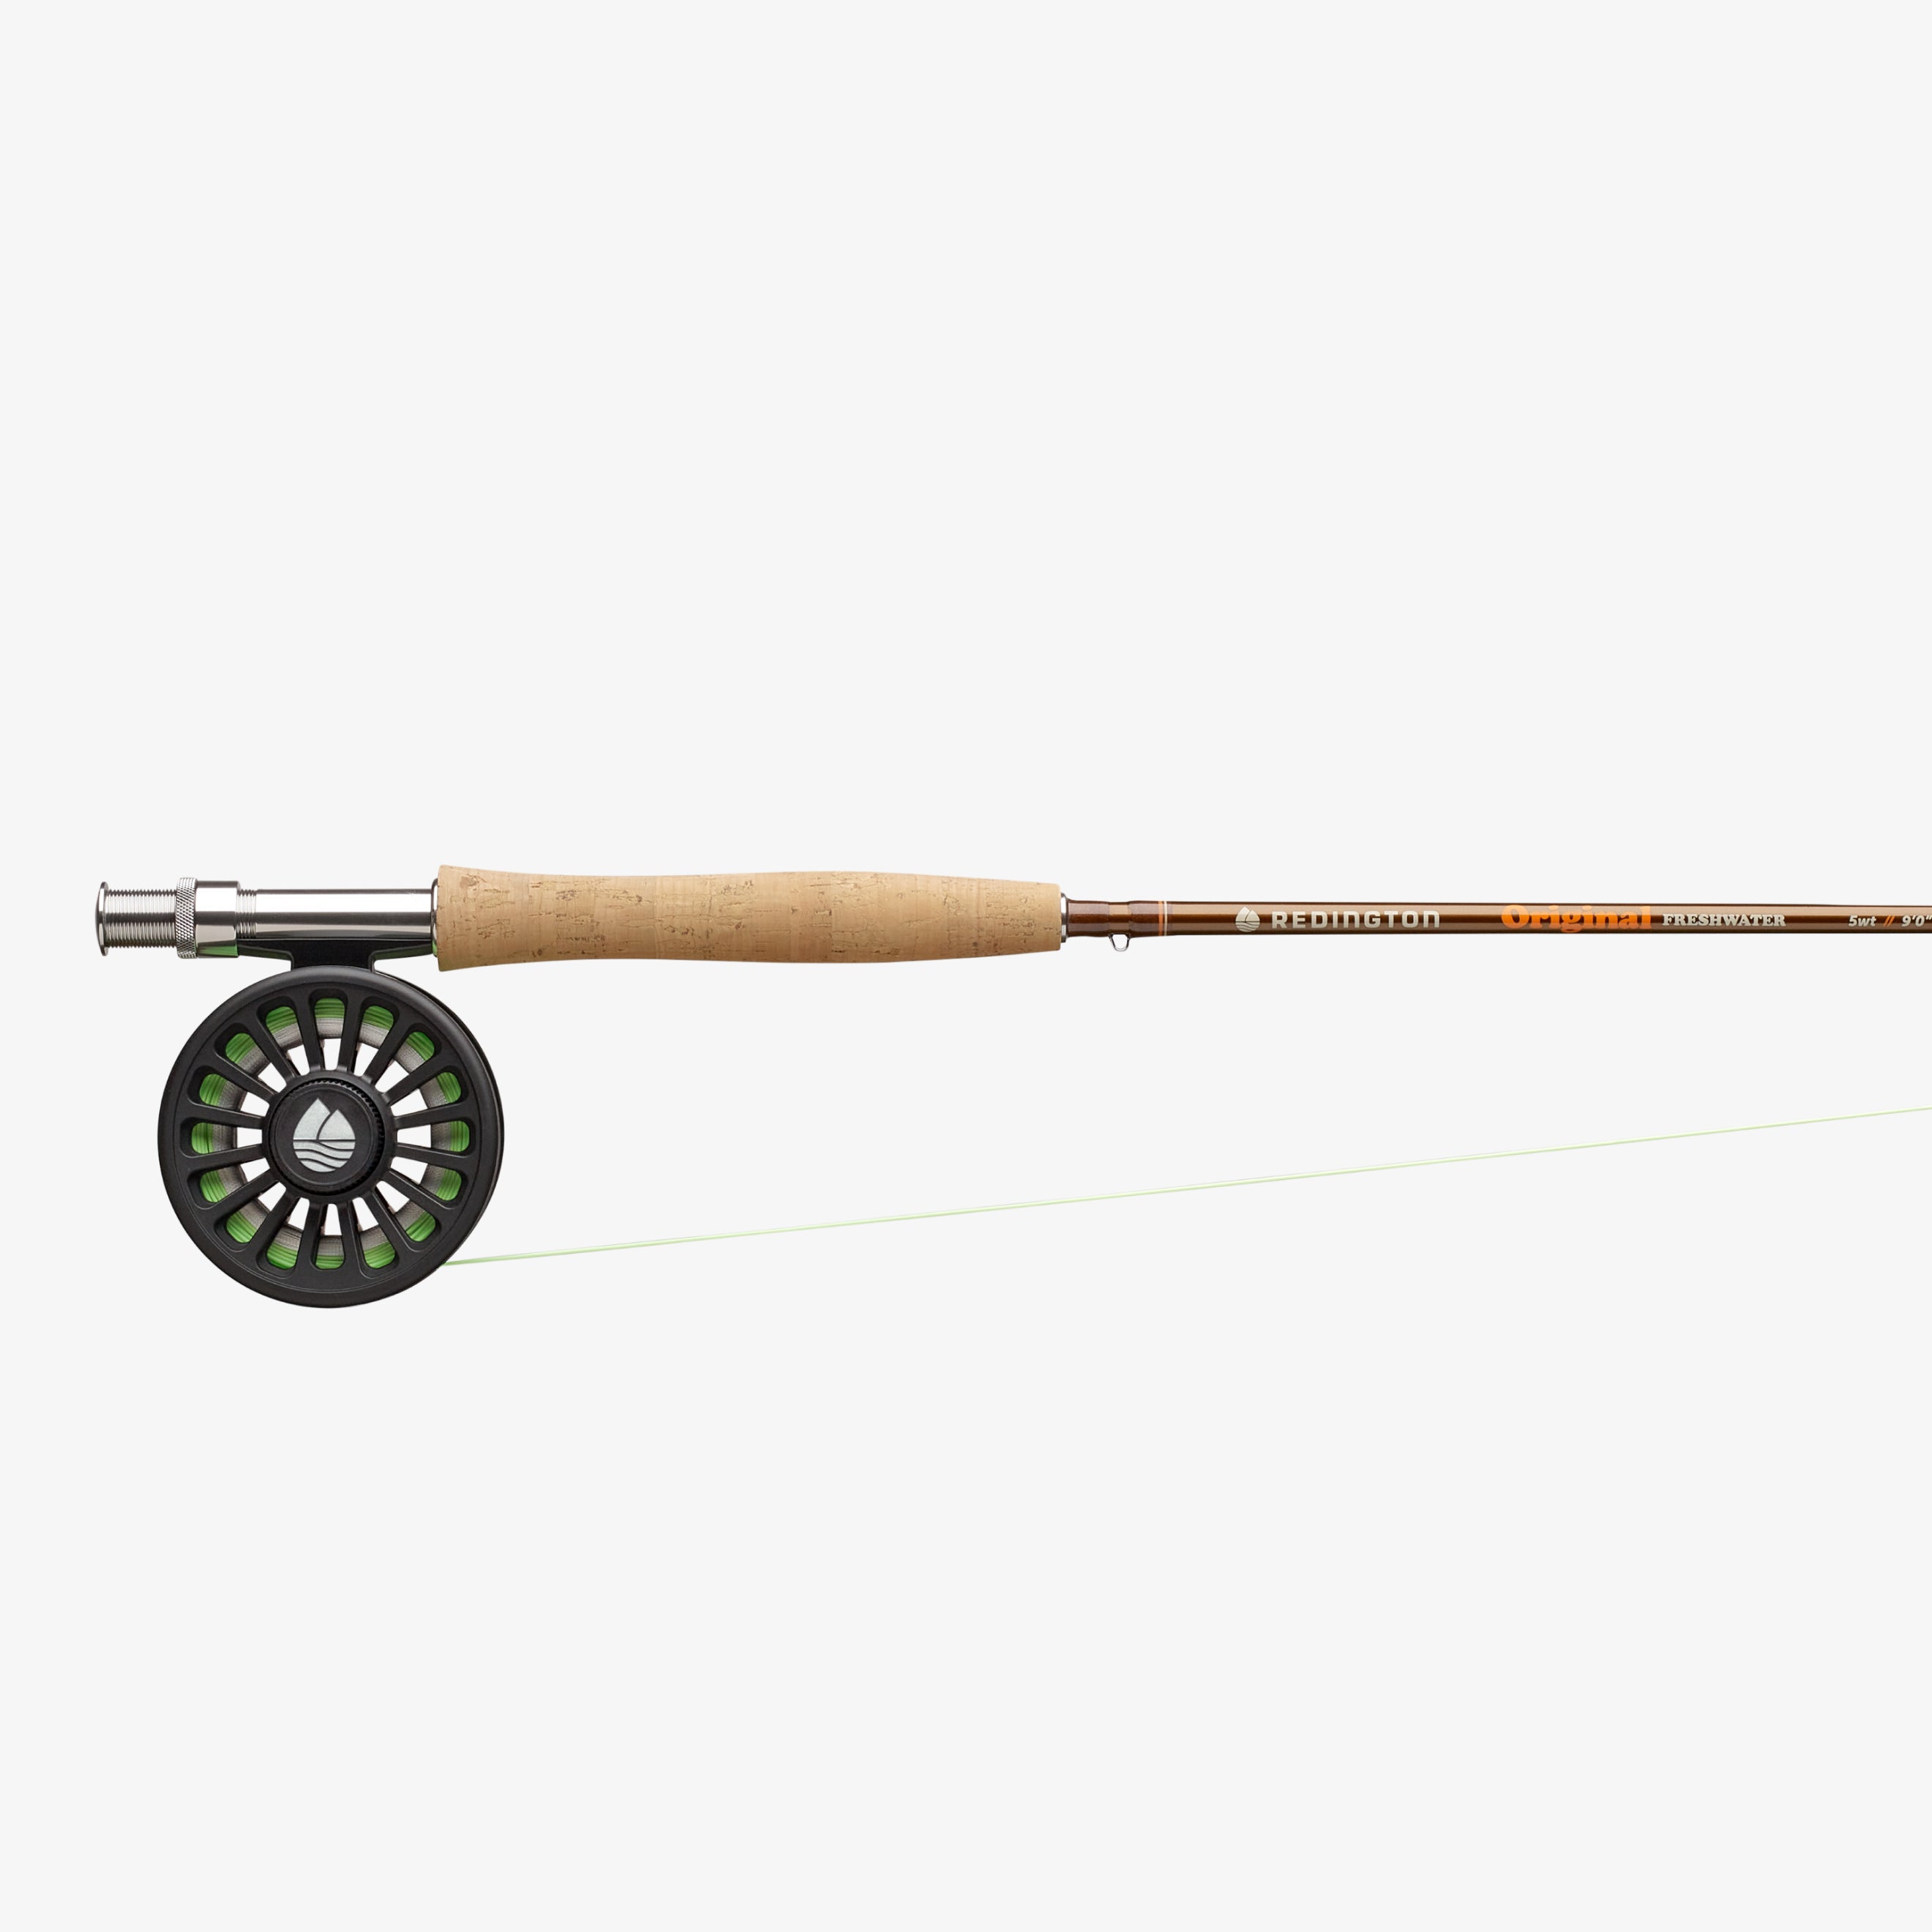 All Freshwater Fly Vintage Fishing Fly Fishing Rods for sale